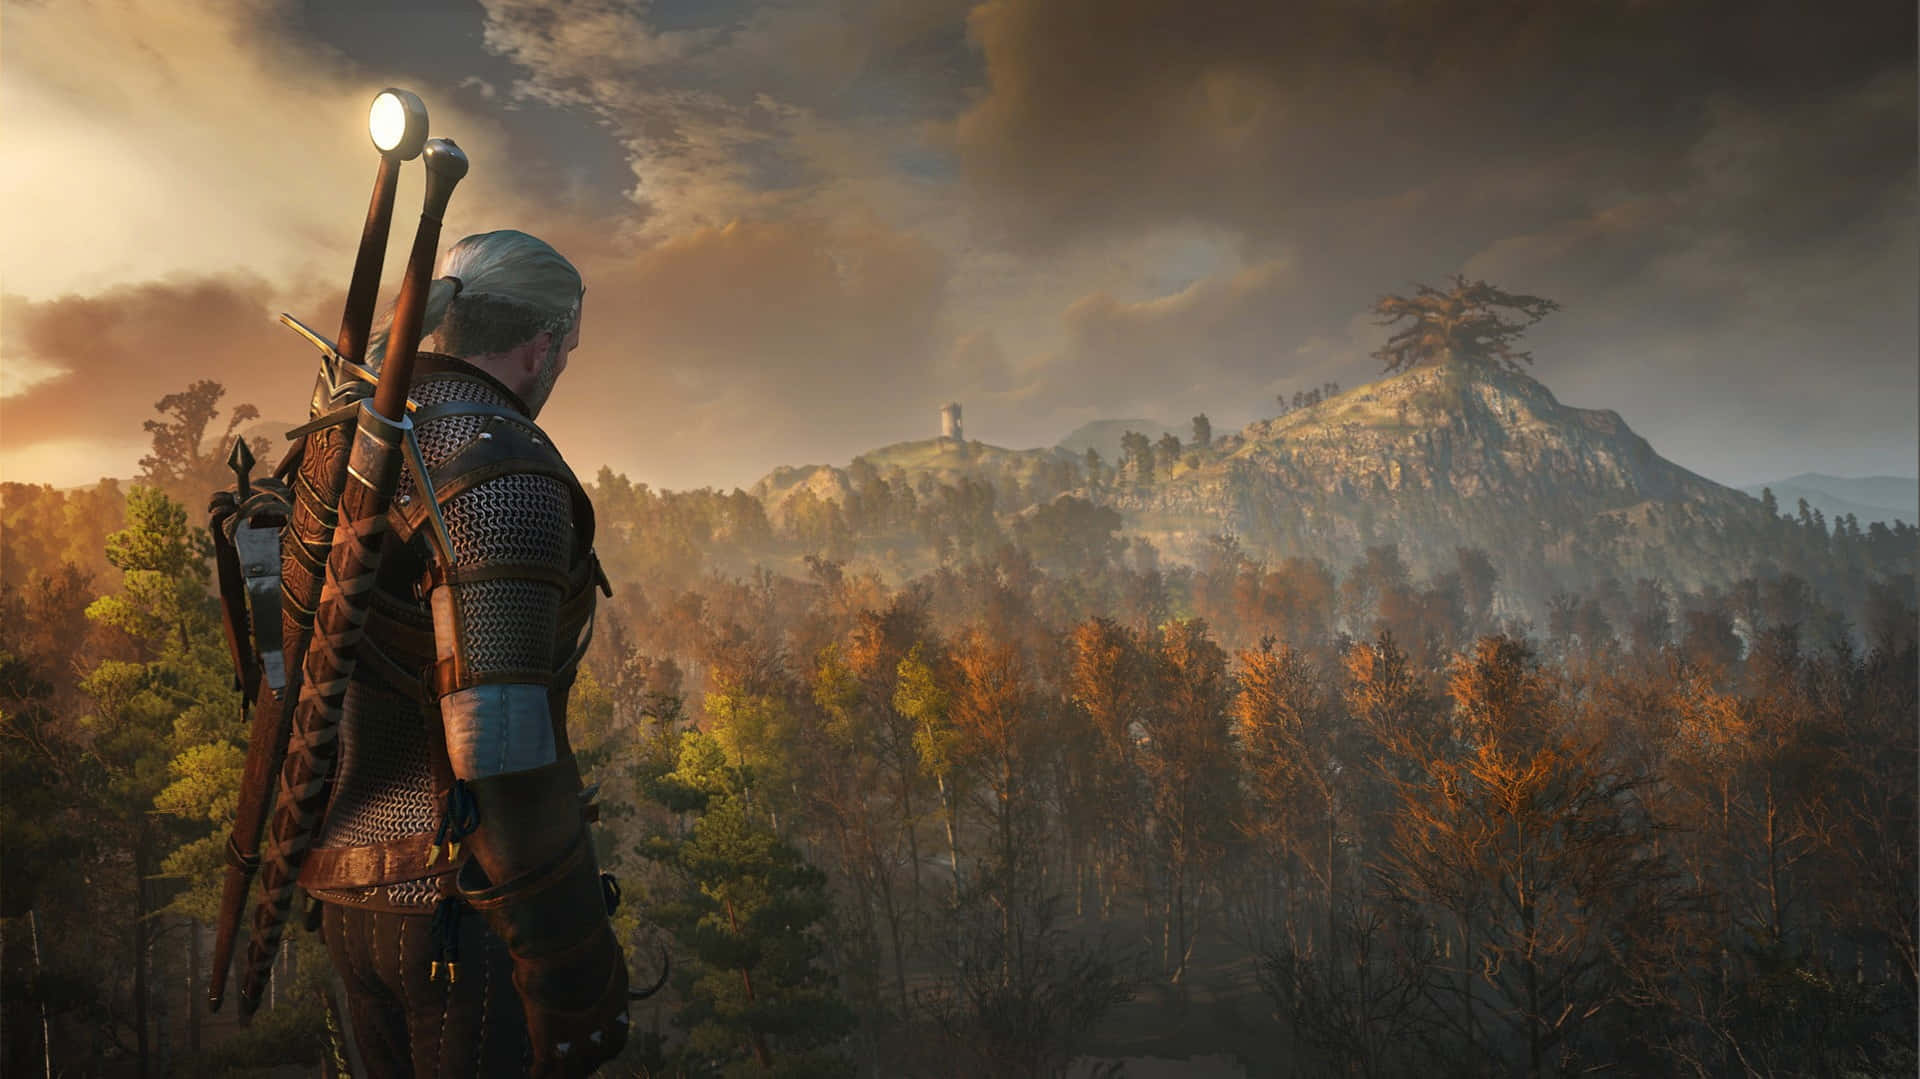 Experience the world of Witcher 3 in stunning detail